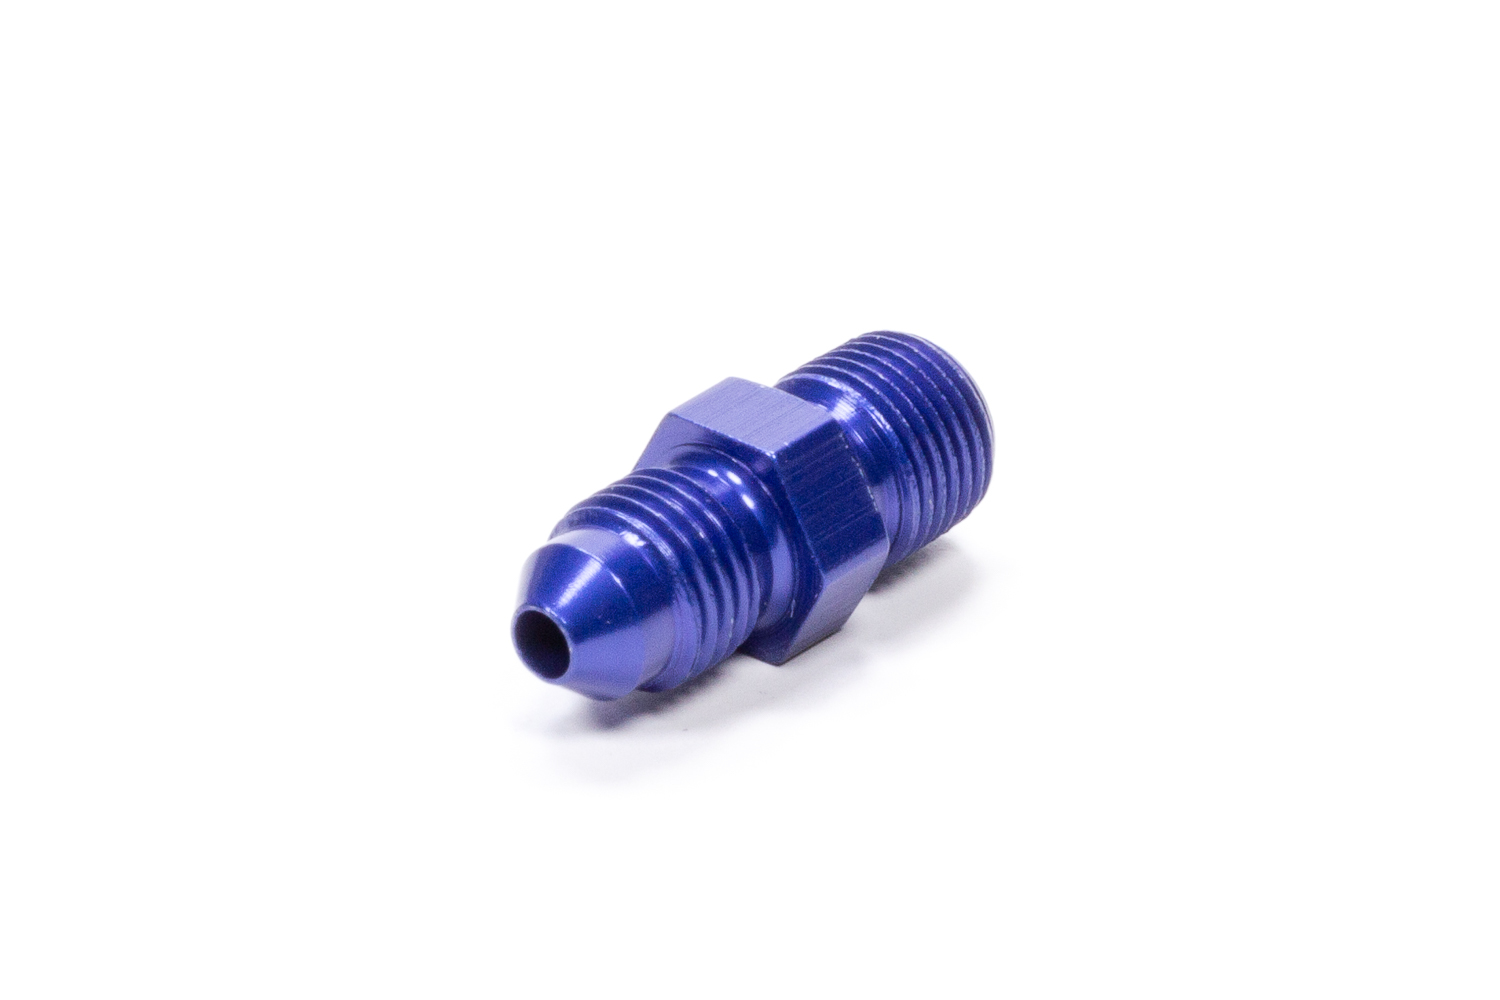 Fragola 481605 - Straight Adapter Fitting #4 x 1/4 MPT